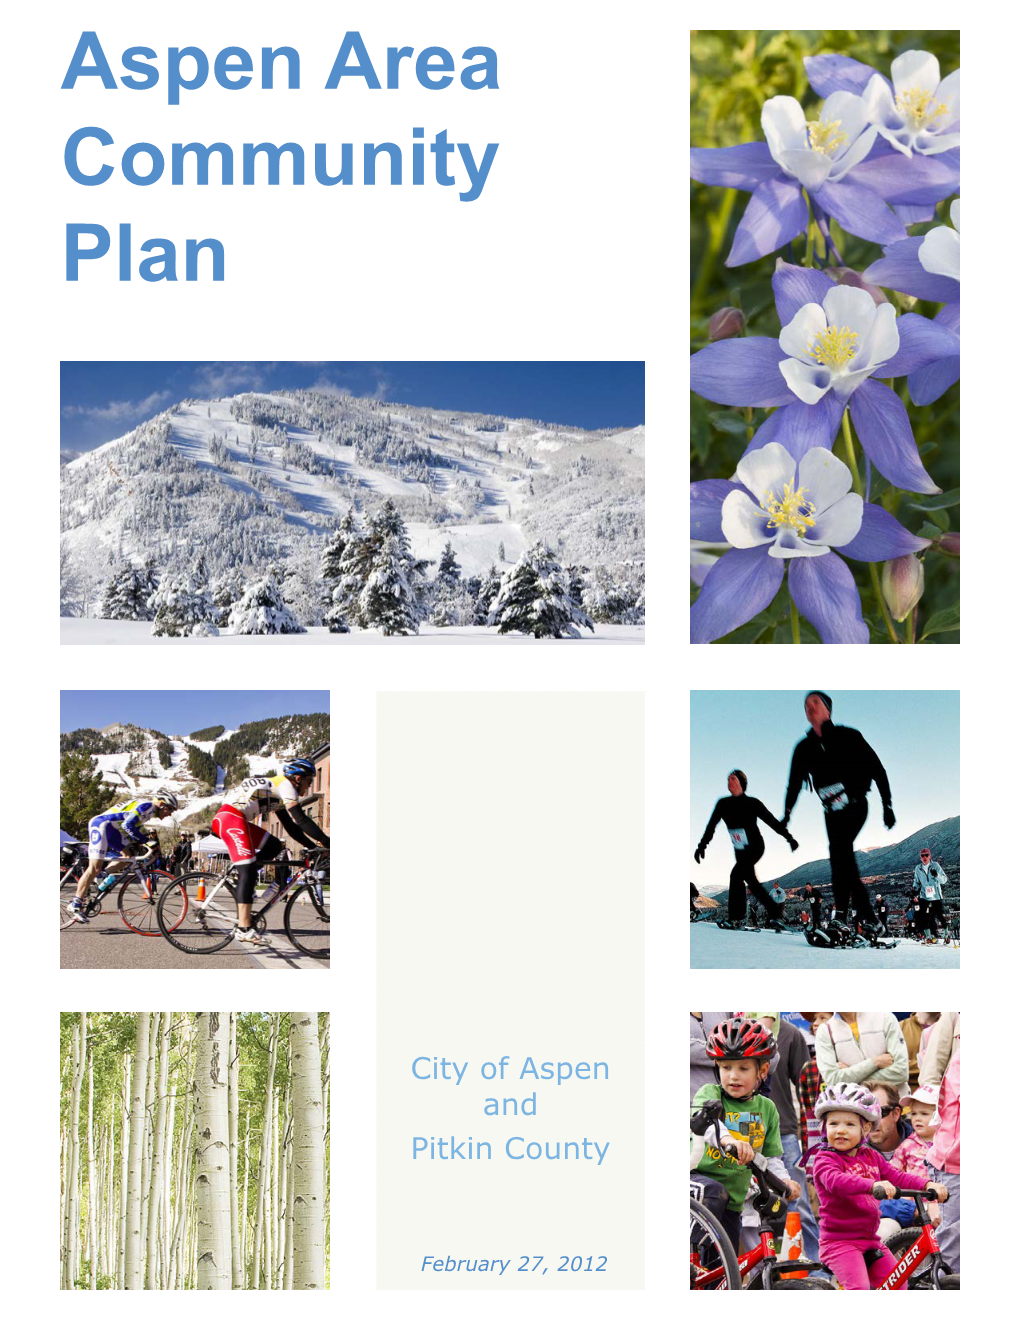 2012 Aspen Area Community Plan (AACP) Is Intended to Describe a Vision for the Future of the Aspen Area That Will Help Guide Community Decision-Making